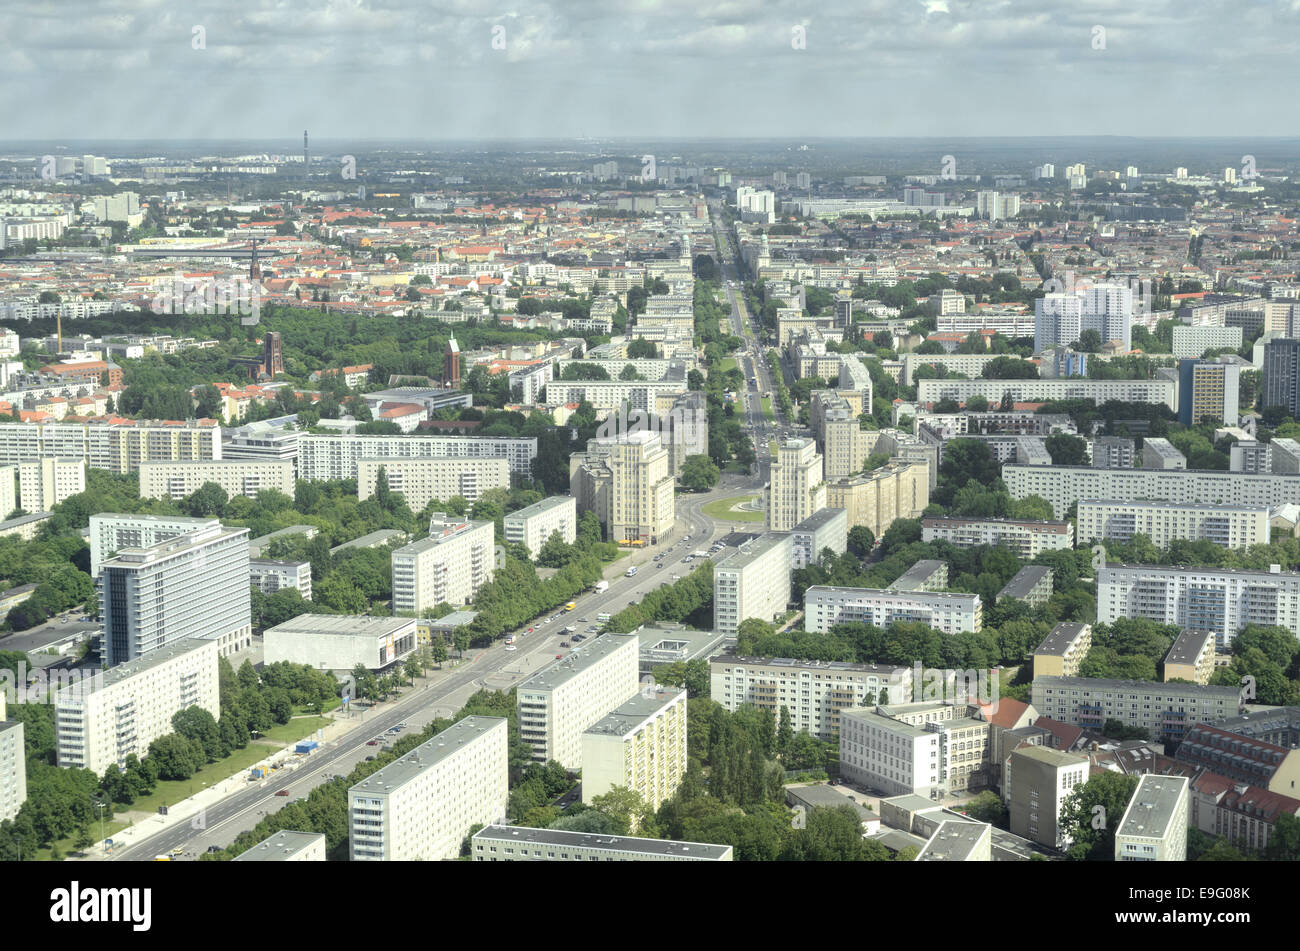 Berlin from above - Karl-Marx-Allee Stock Photo